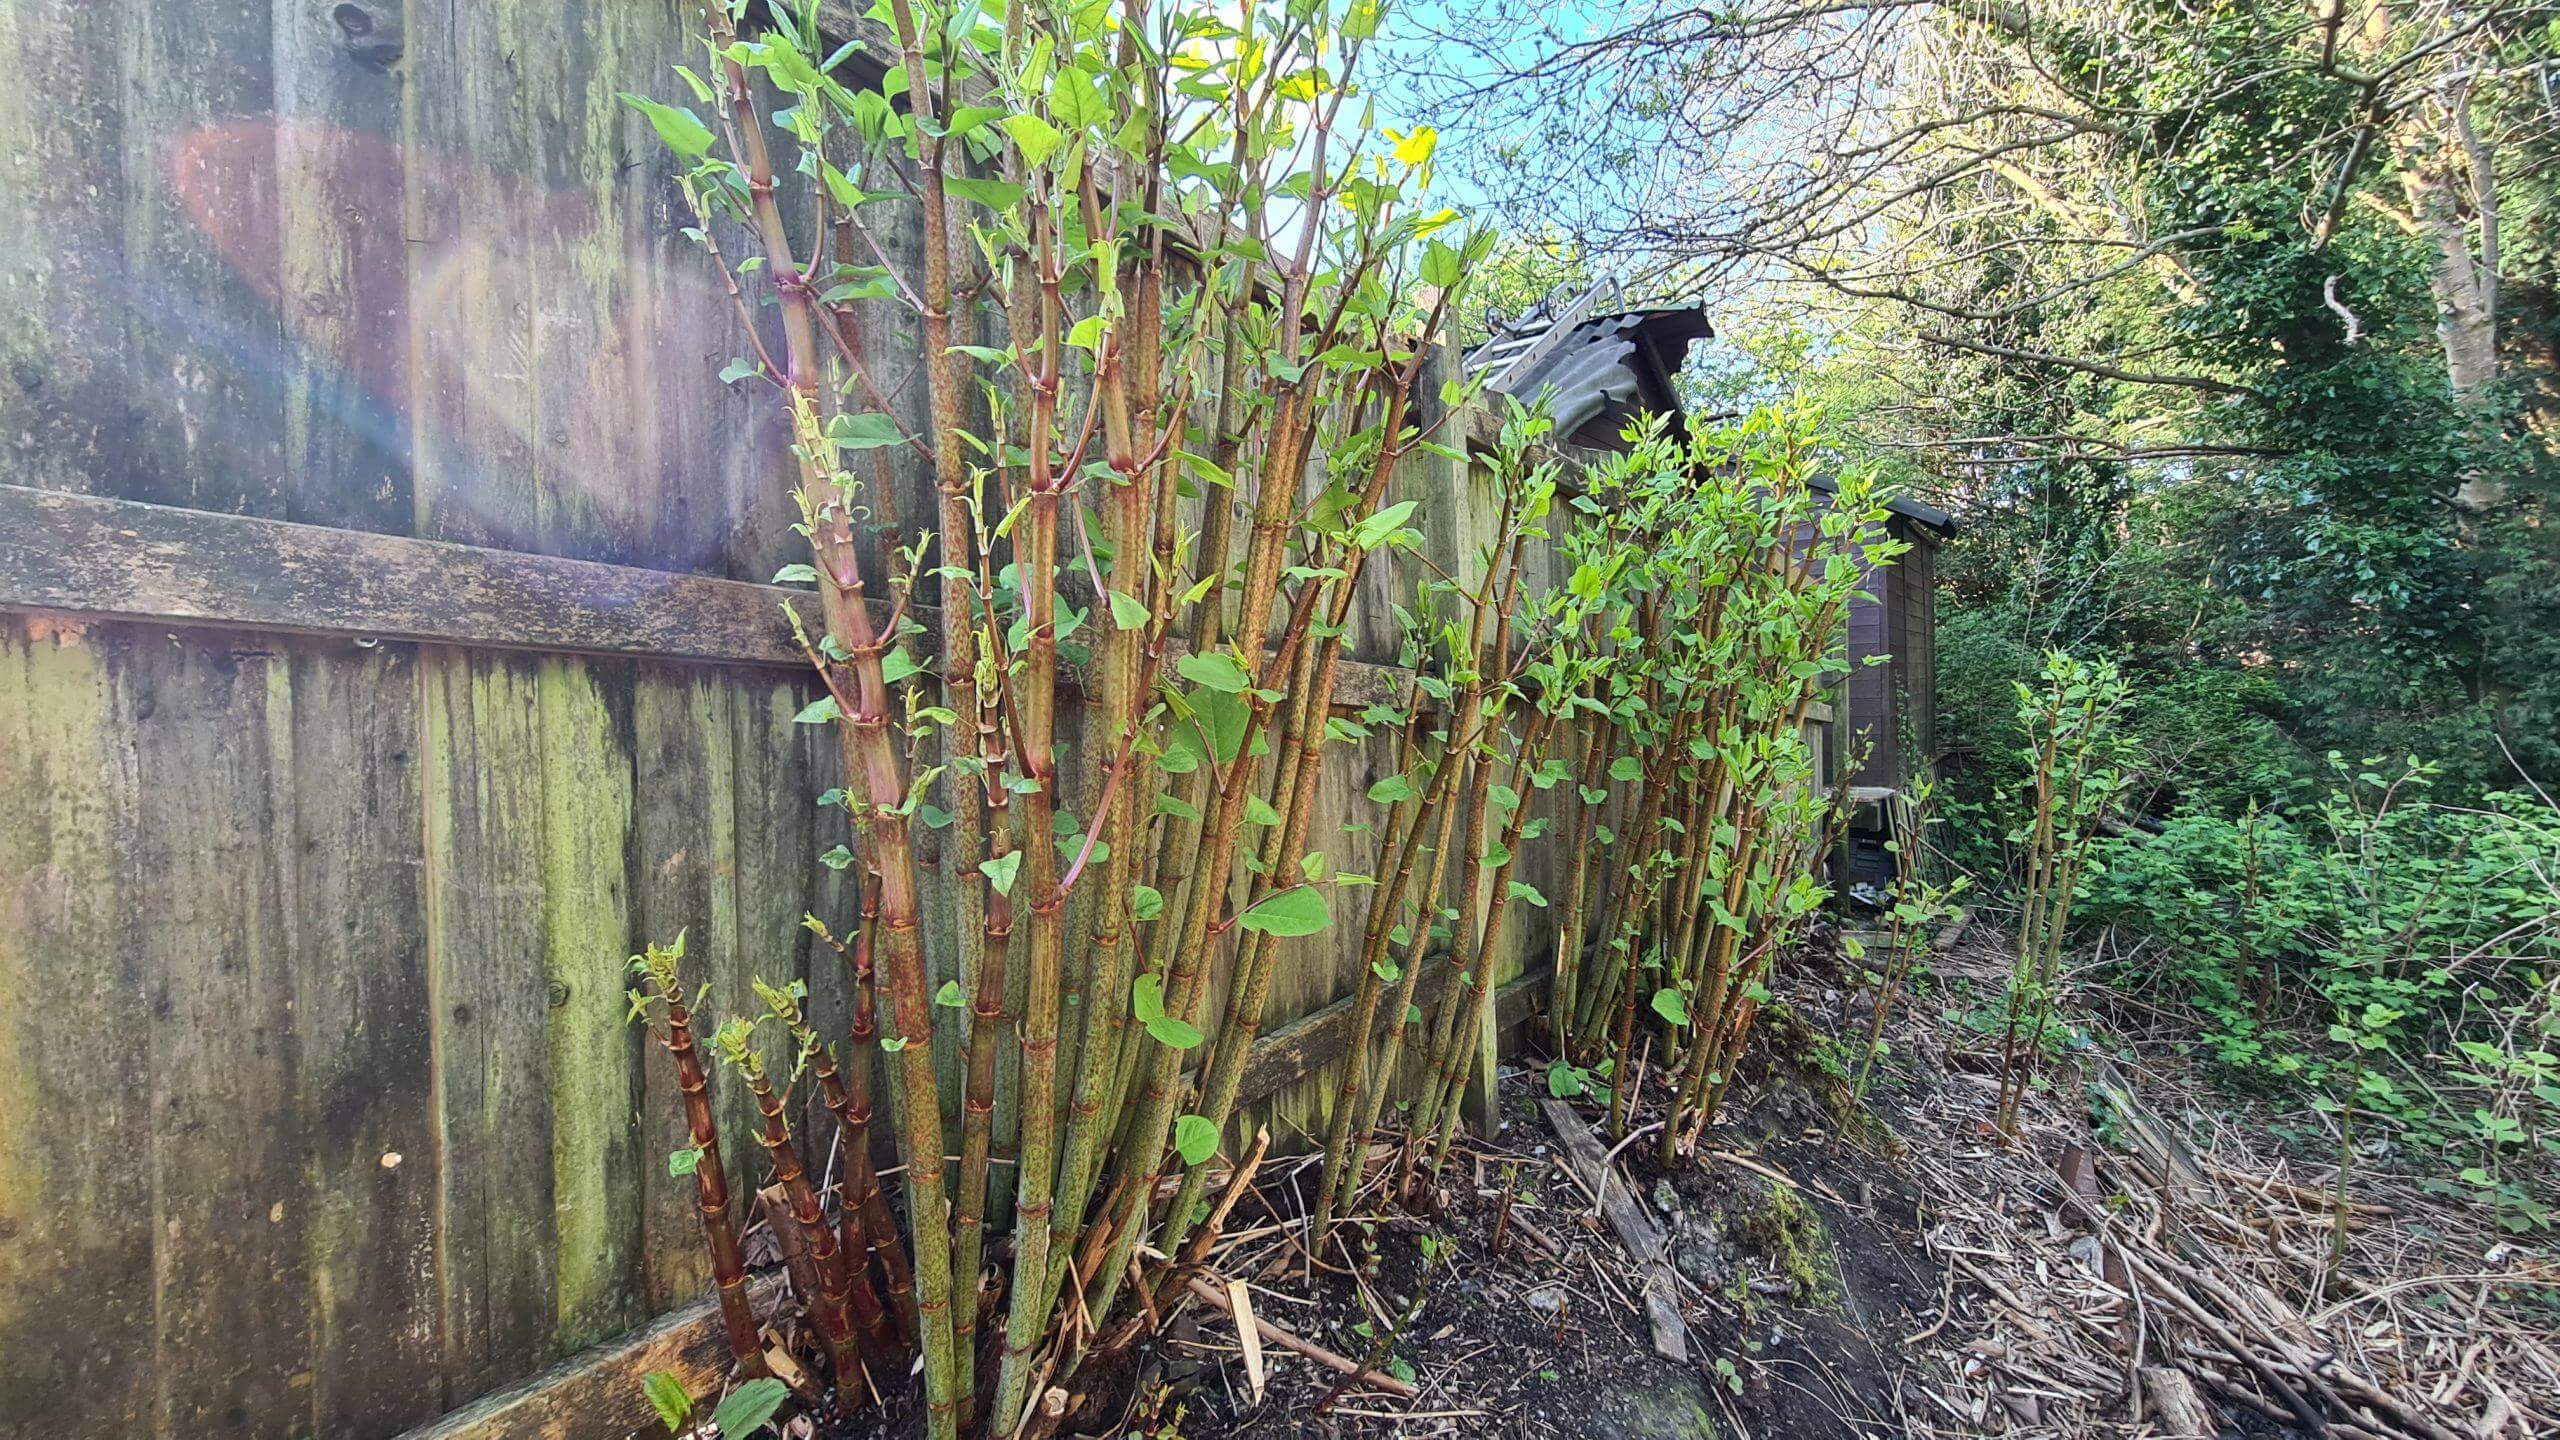 Typically when treating one Japanese knotweed crown you end up treating many as they grow so close together